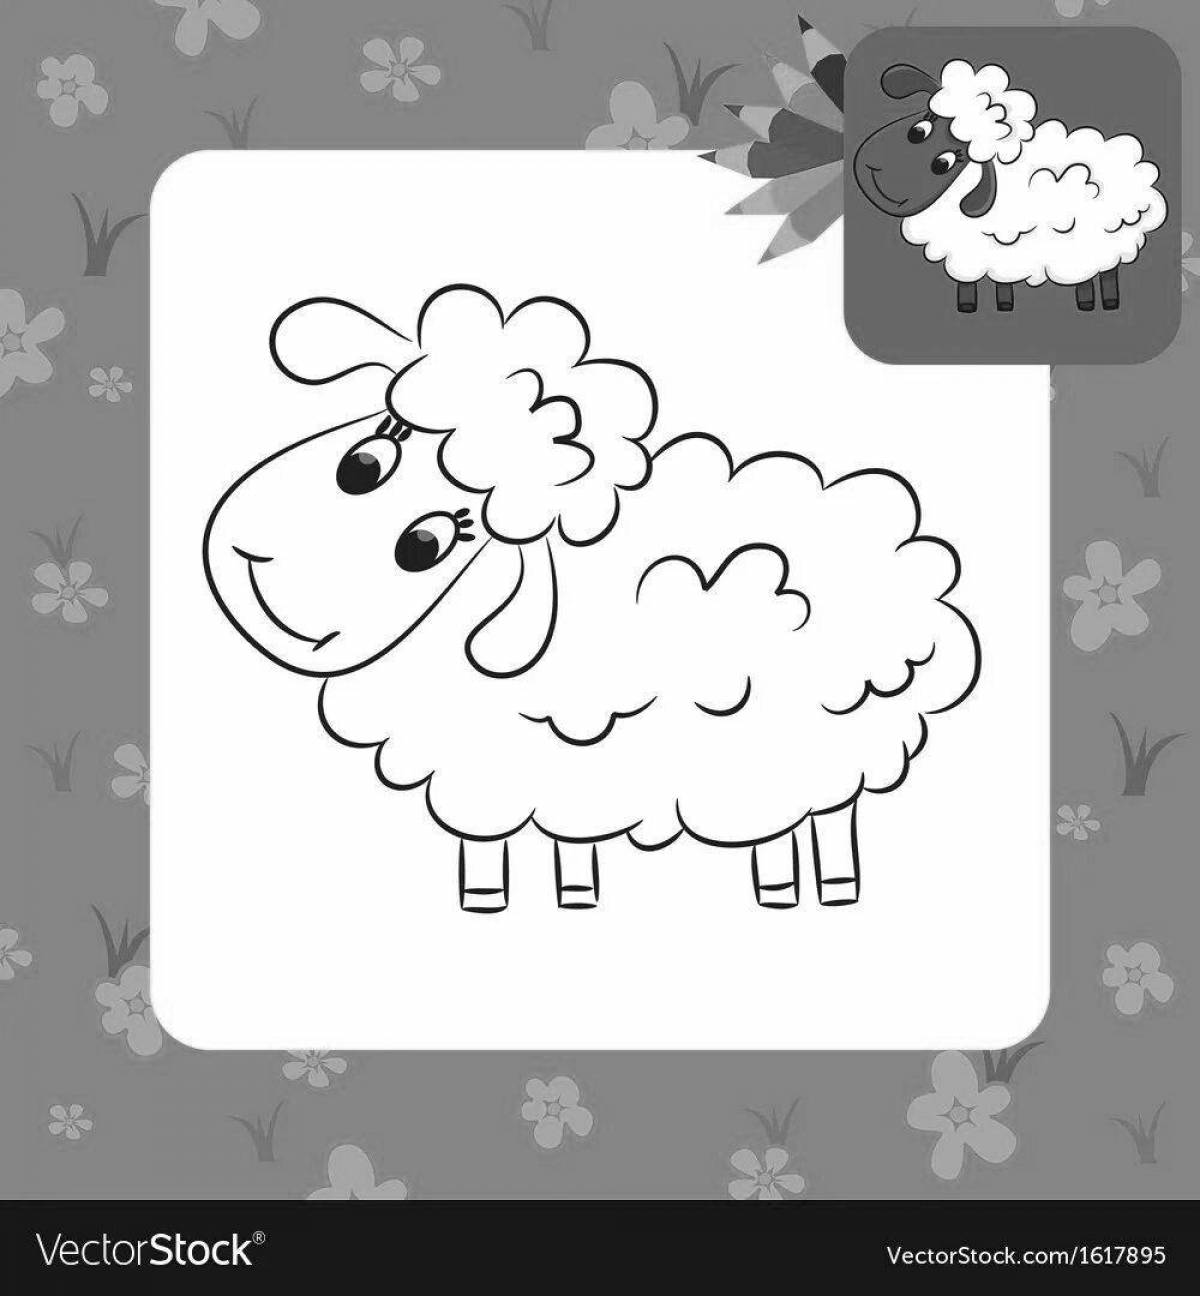 Playful sheep coloring book for 2-3 year olds